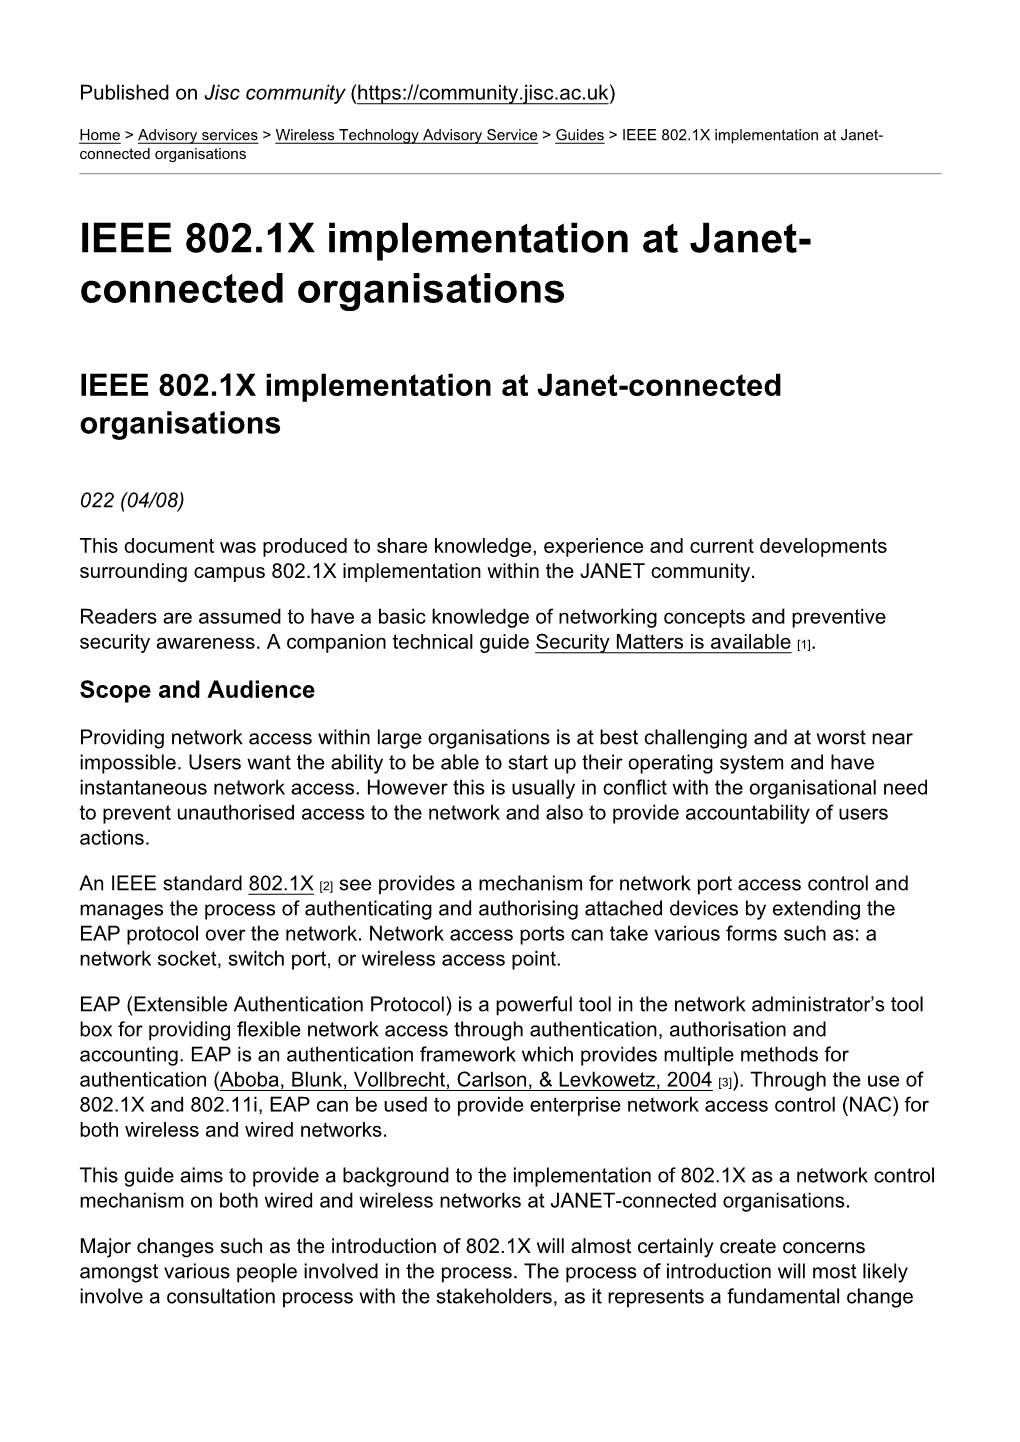 IEEE 802.1X Implementation at Janet-Connected Organisations